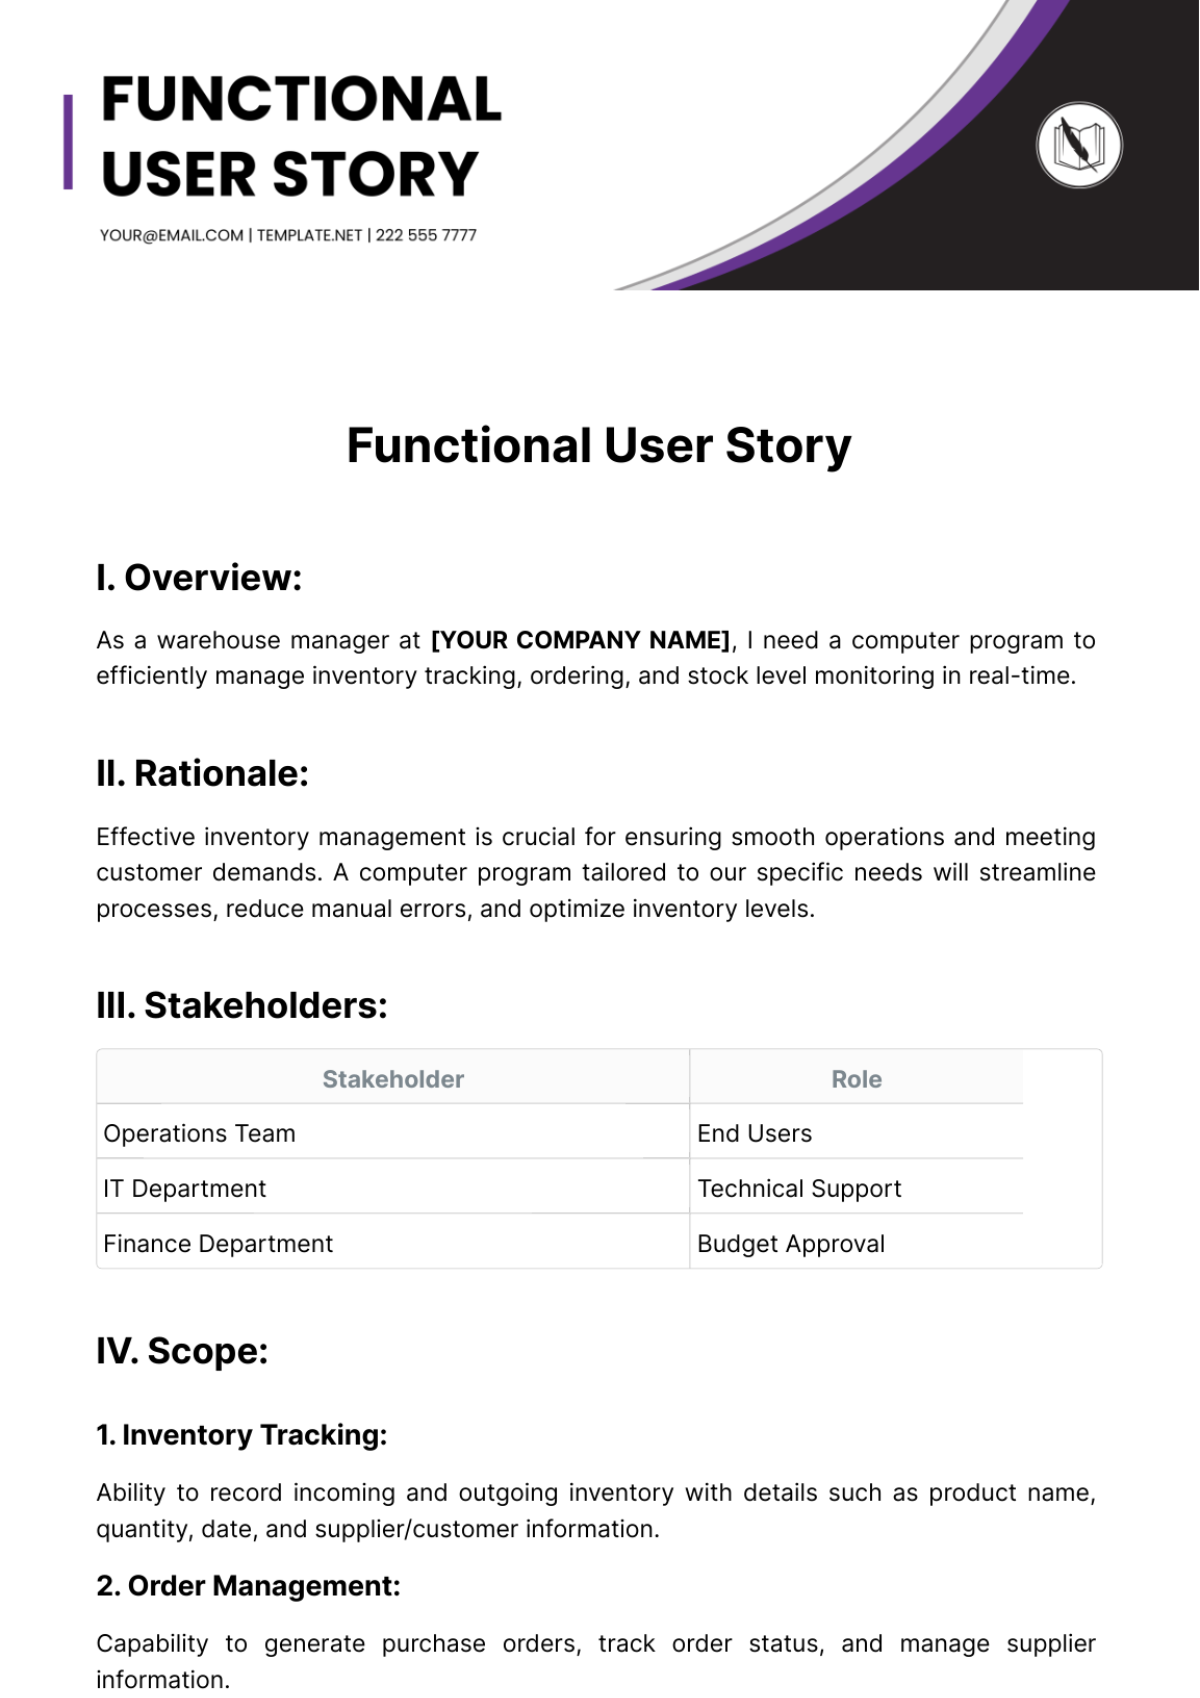 Functional User Story Template